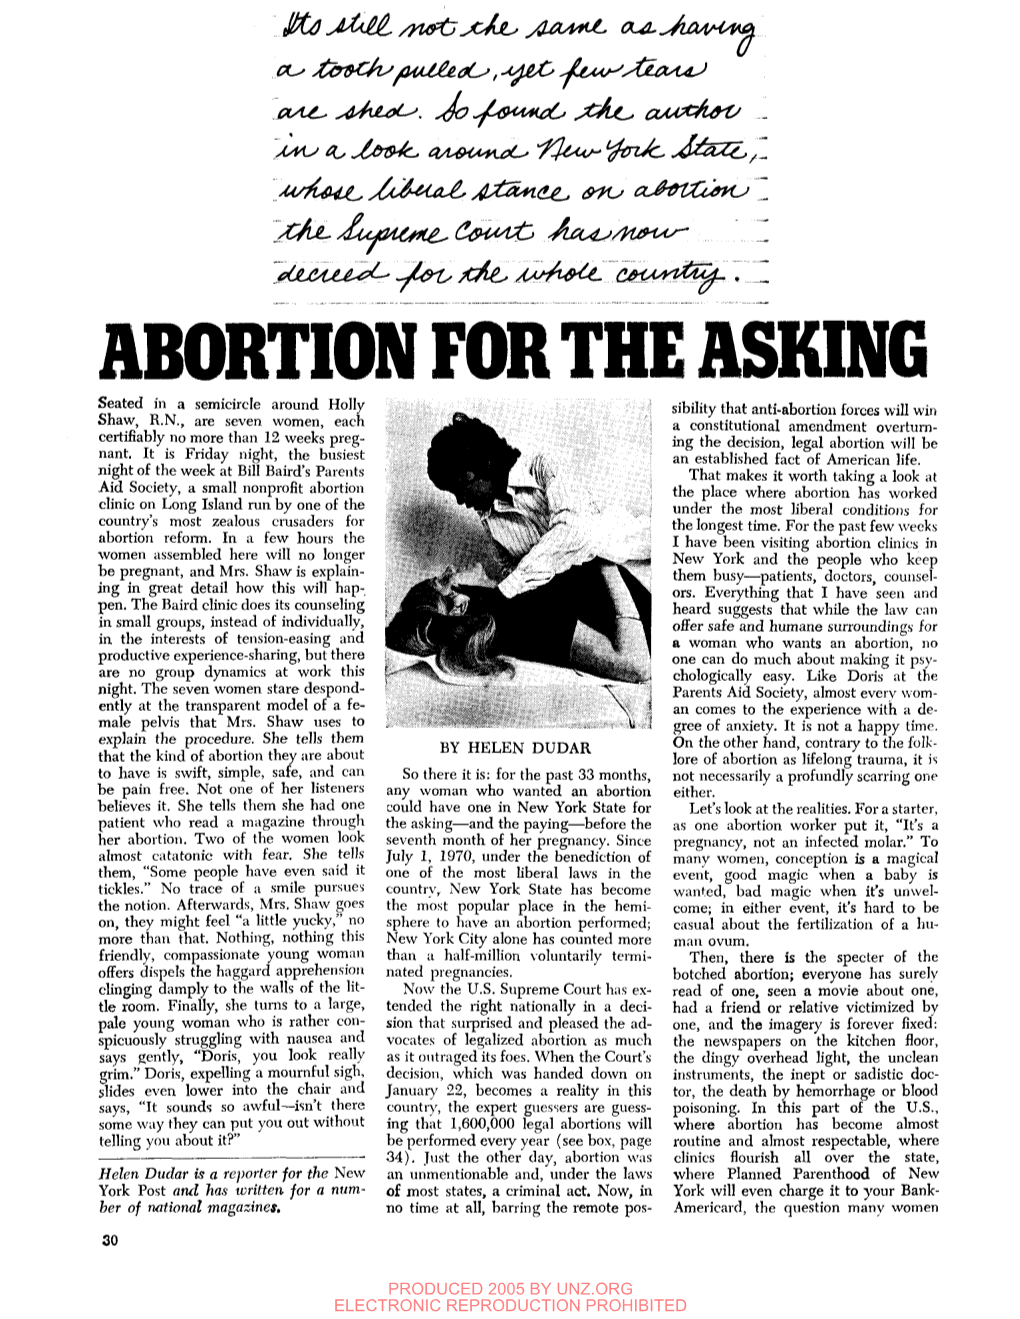 Abortion for the Asking